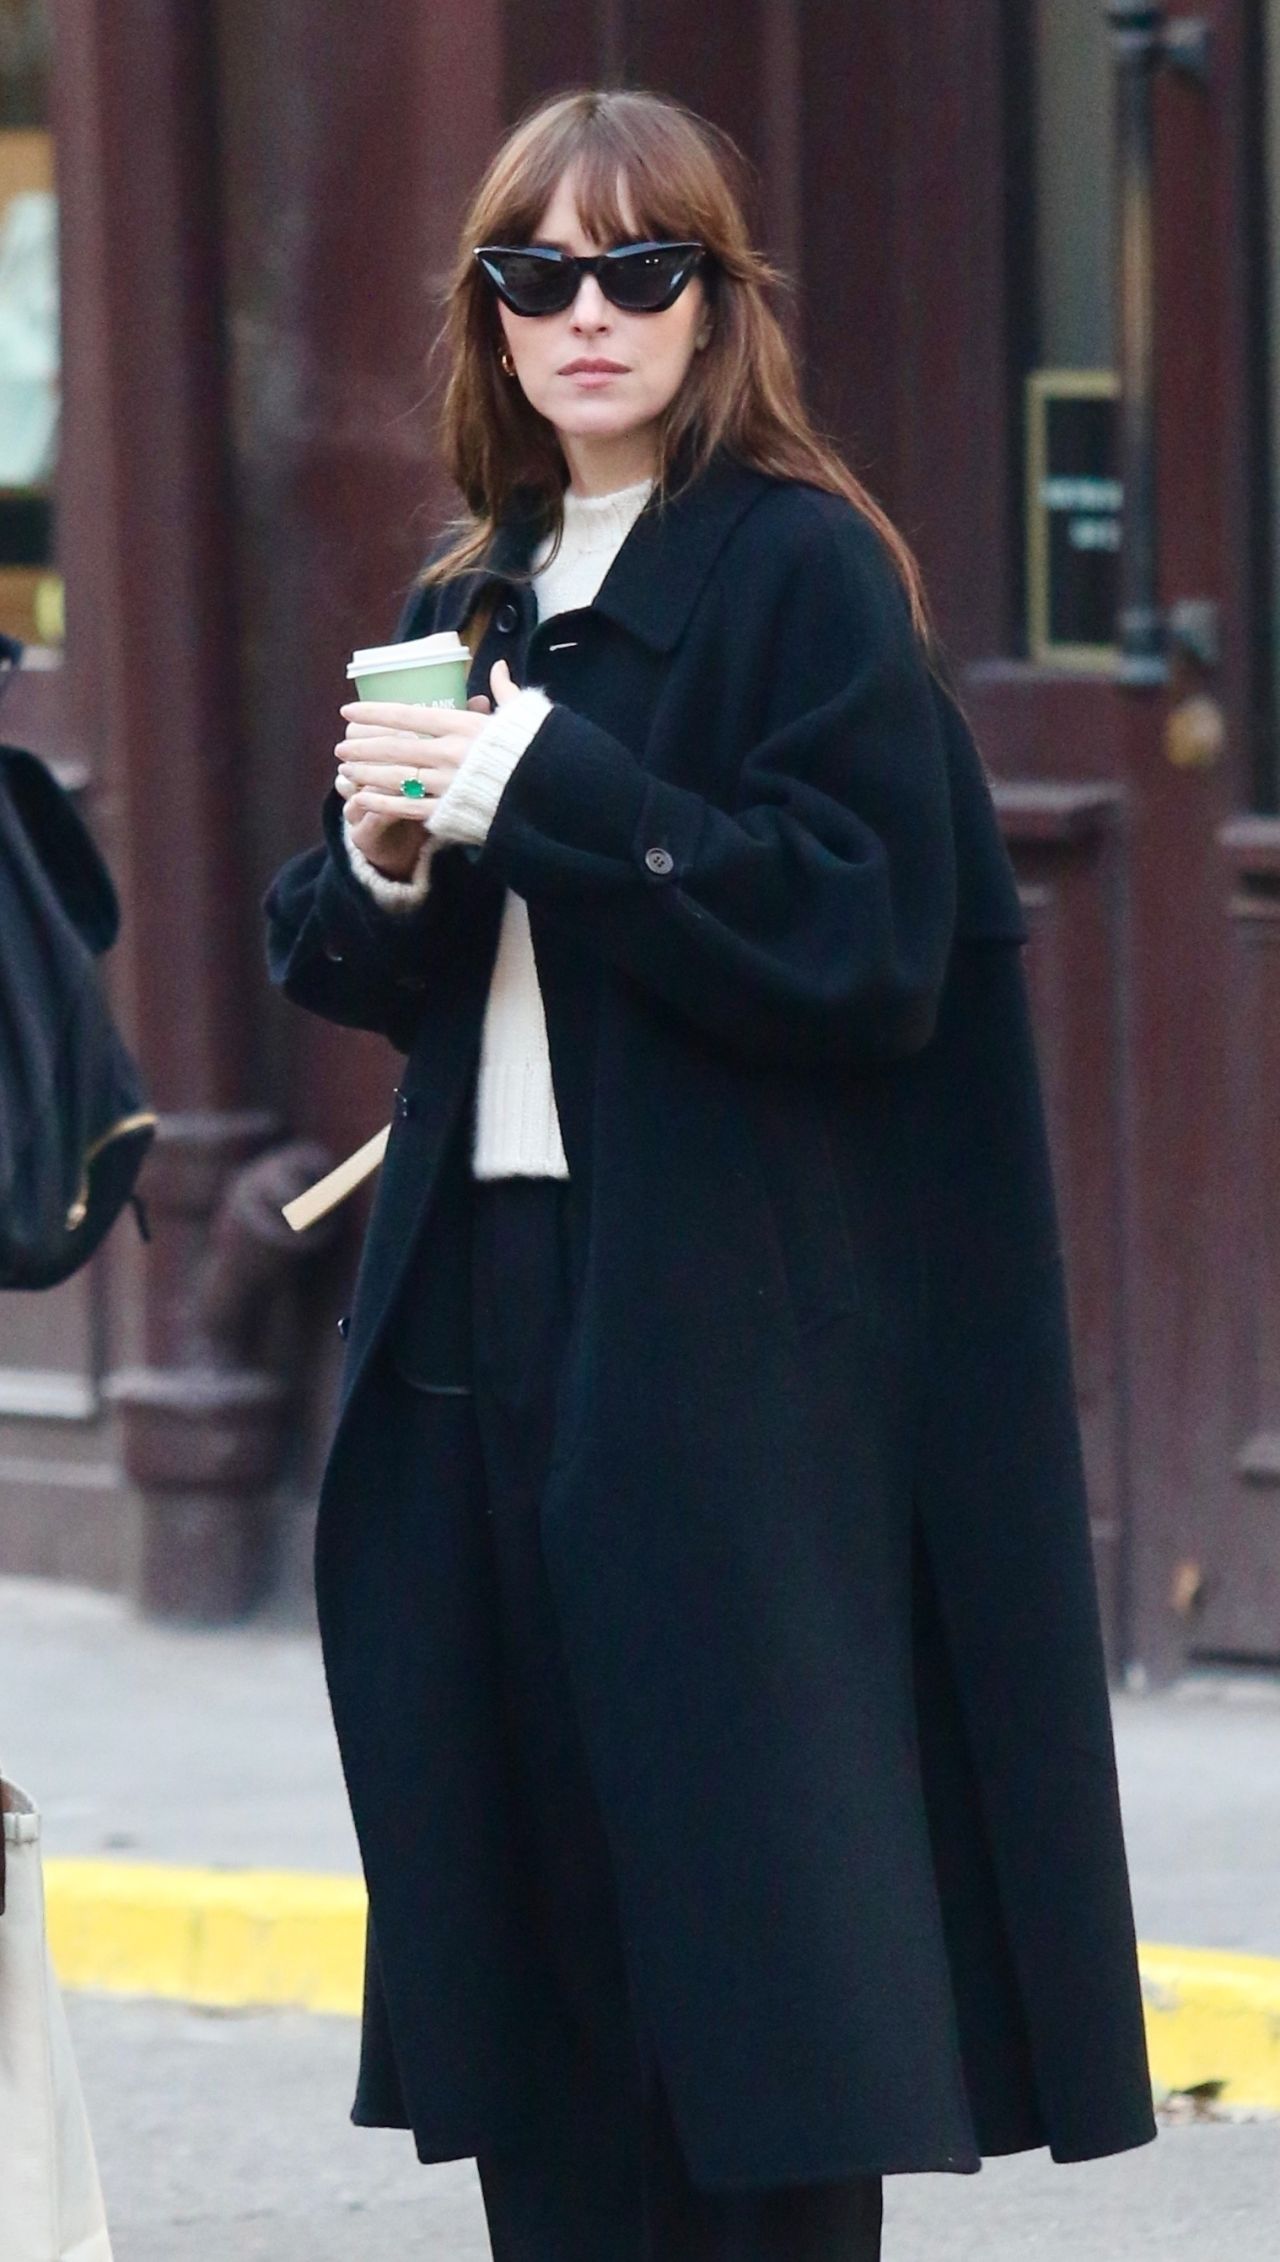 Dakota Johnson Style, Clothes, Outfits and Fashion• Page 4 of 75 ...